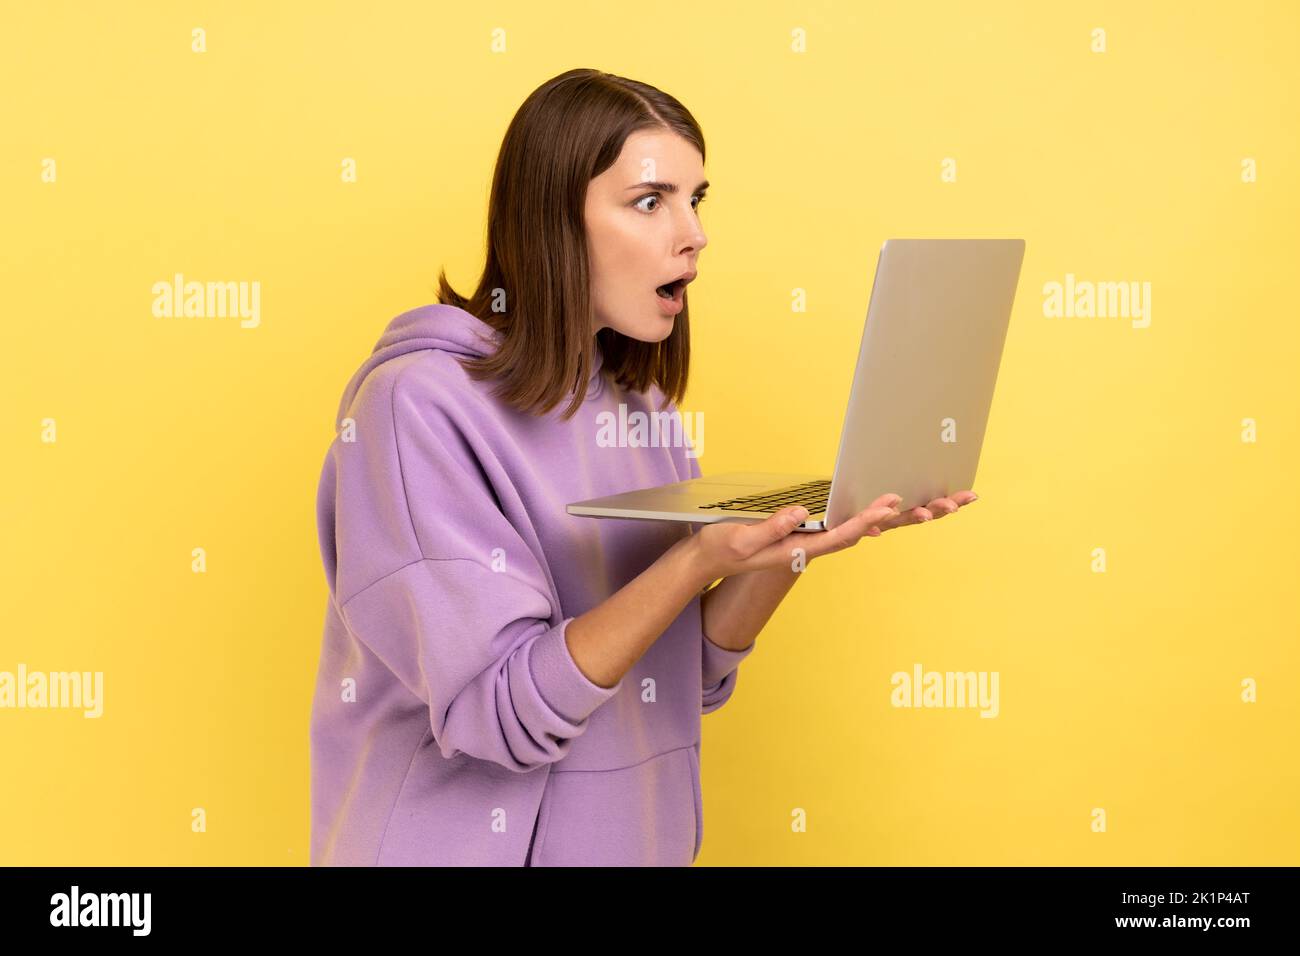 Portrait of amazed shocked young adult woman working on laptop compute, looking at display with open mouth, wearing purple hoodie. Indoor studio shot isolated on yellow background. Stock Photo